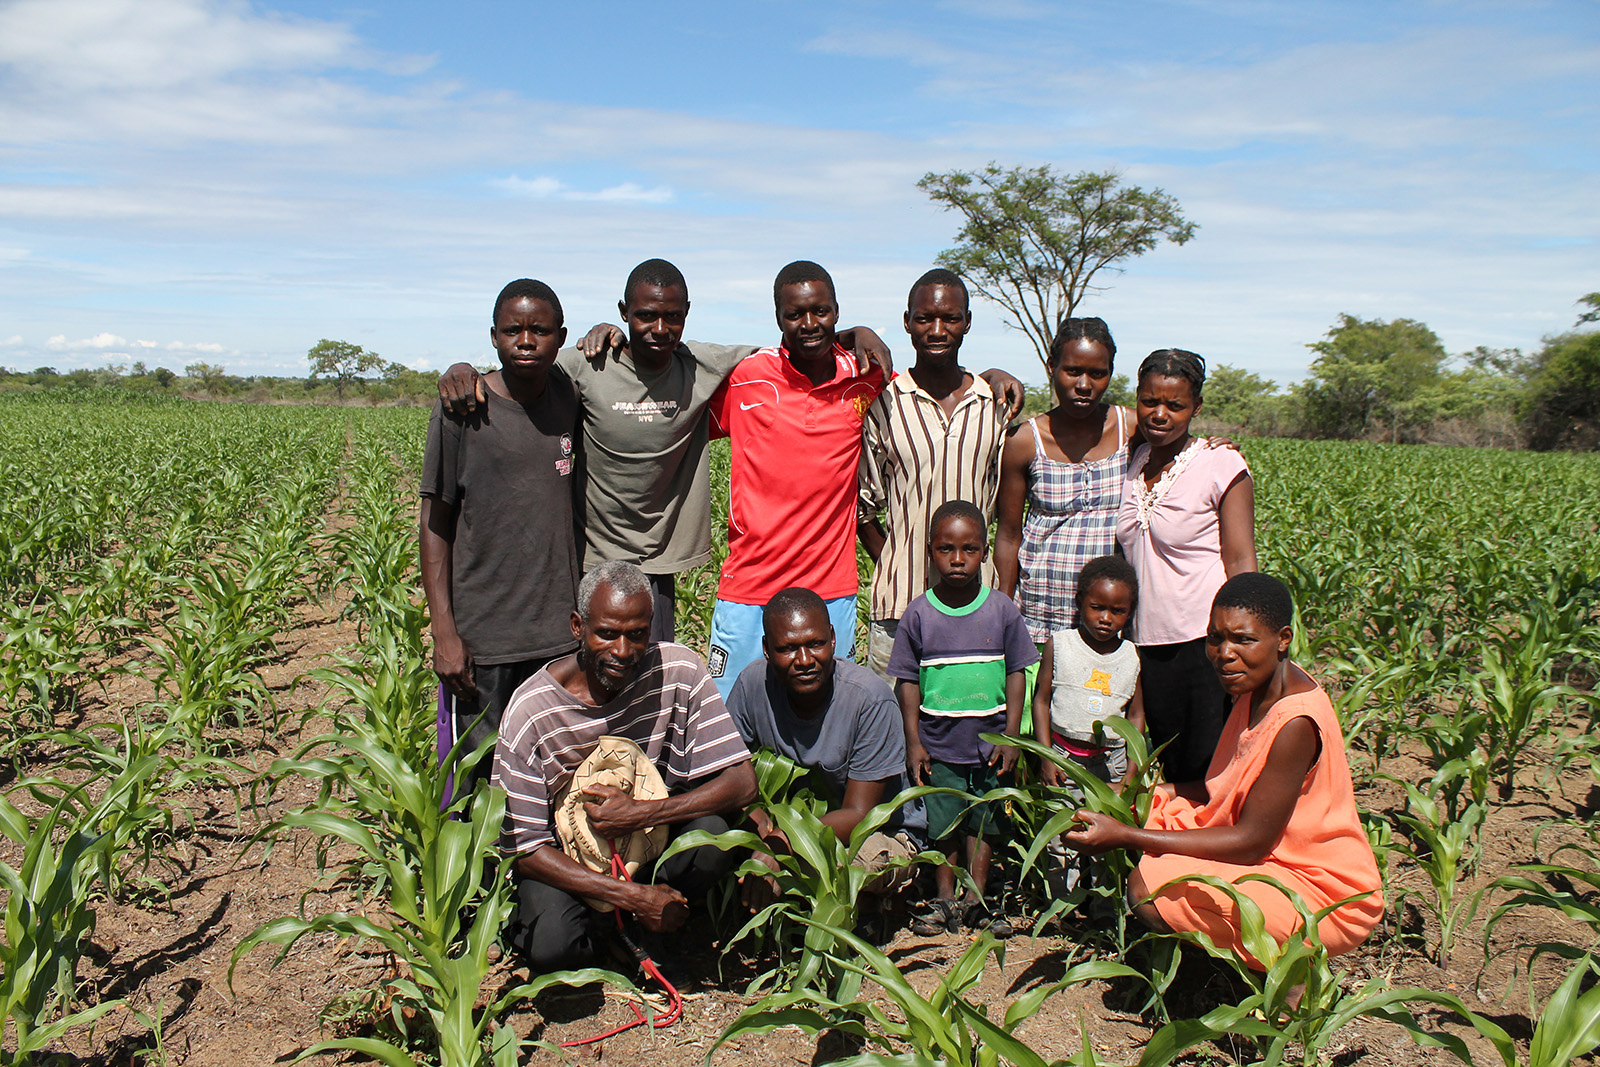 Beneficiaries of Foundations for Farming's I Was Hungry program in Zimbabwe in 2016. Photo courtesy of Foundations for Farming